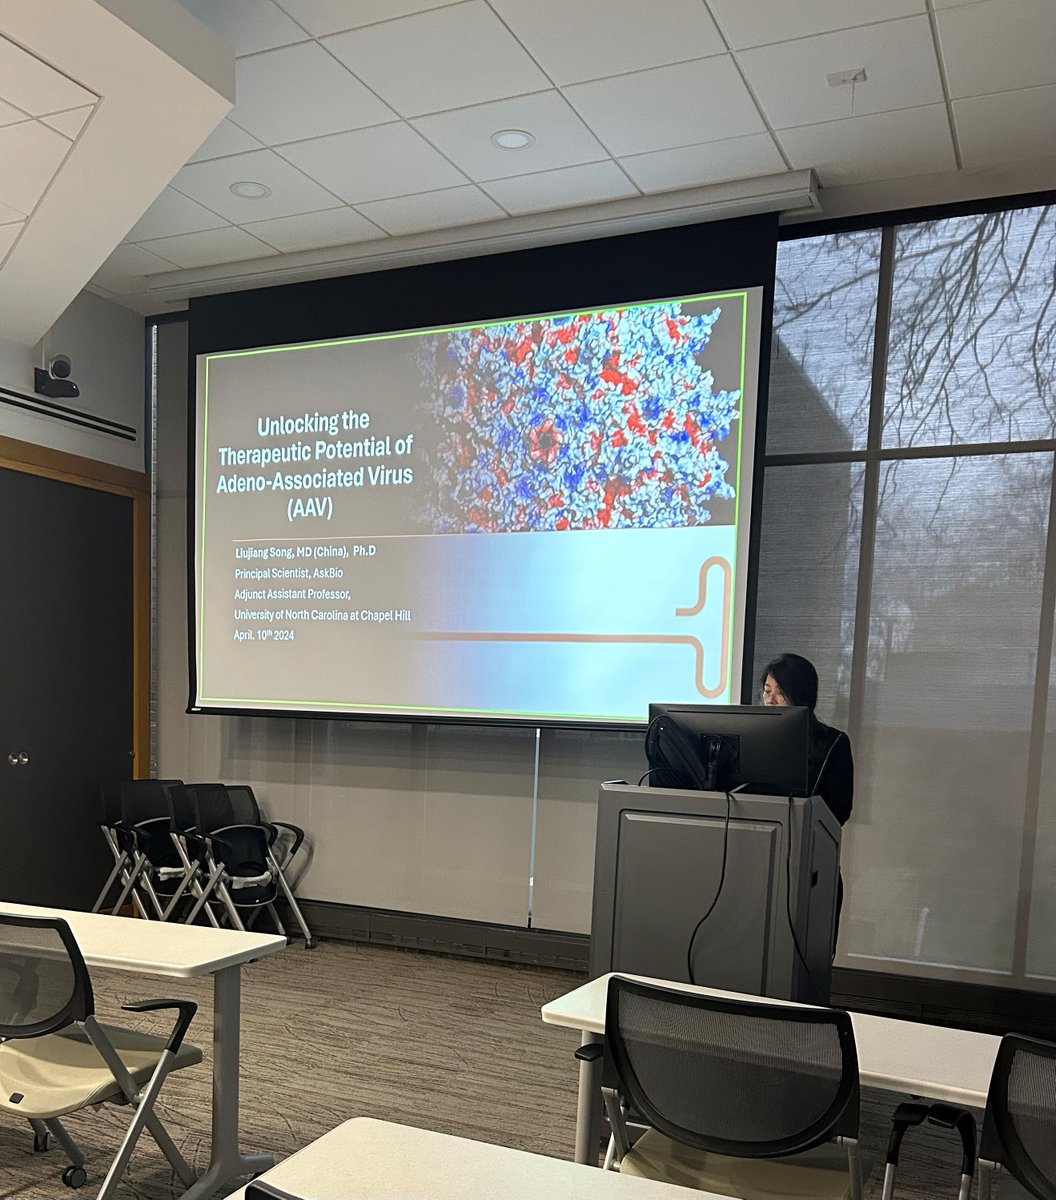 Great presentation by Dr. Liujiang Song today on 'Unlocking the Therapeutic Potential of Adeno-Associated Virus (AAV)'🧬